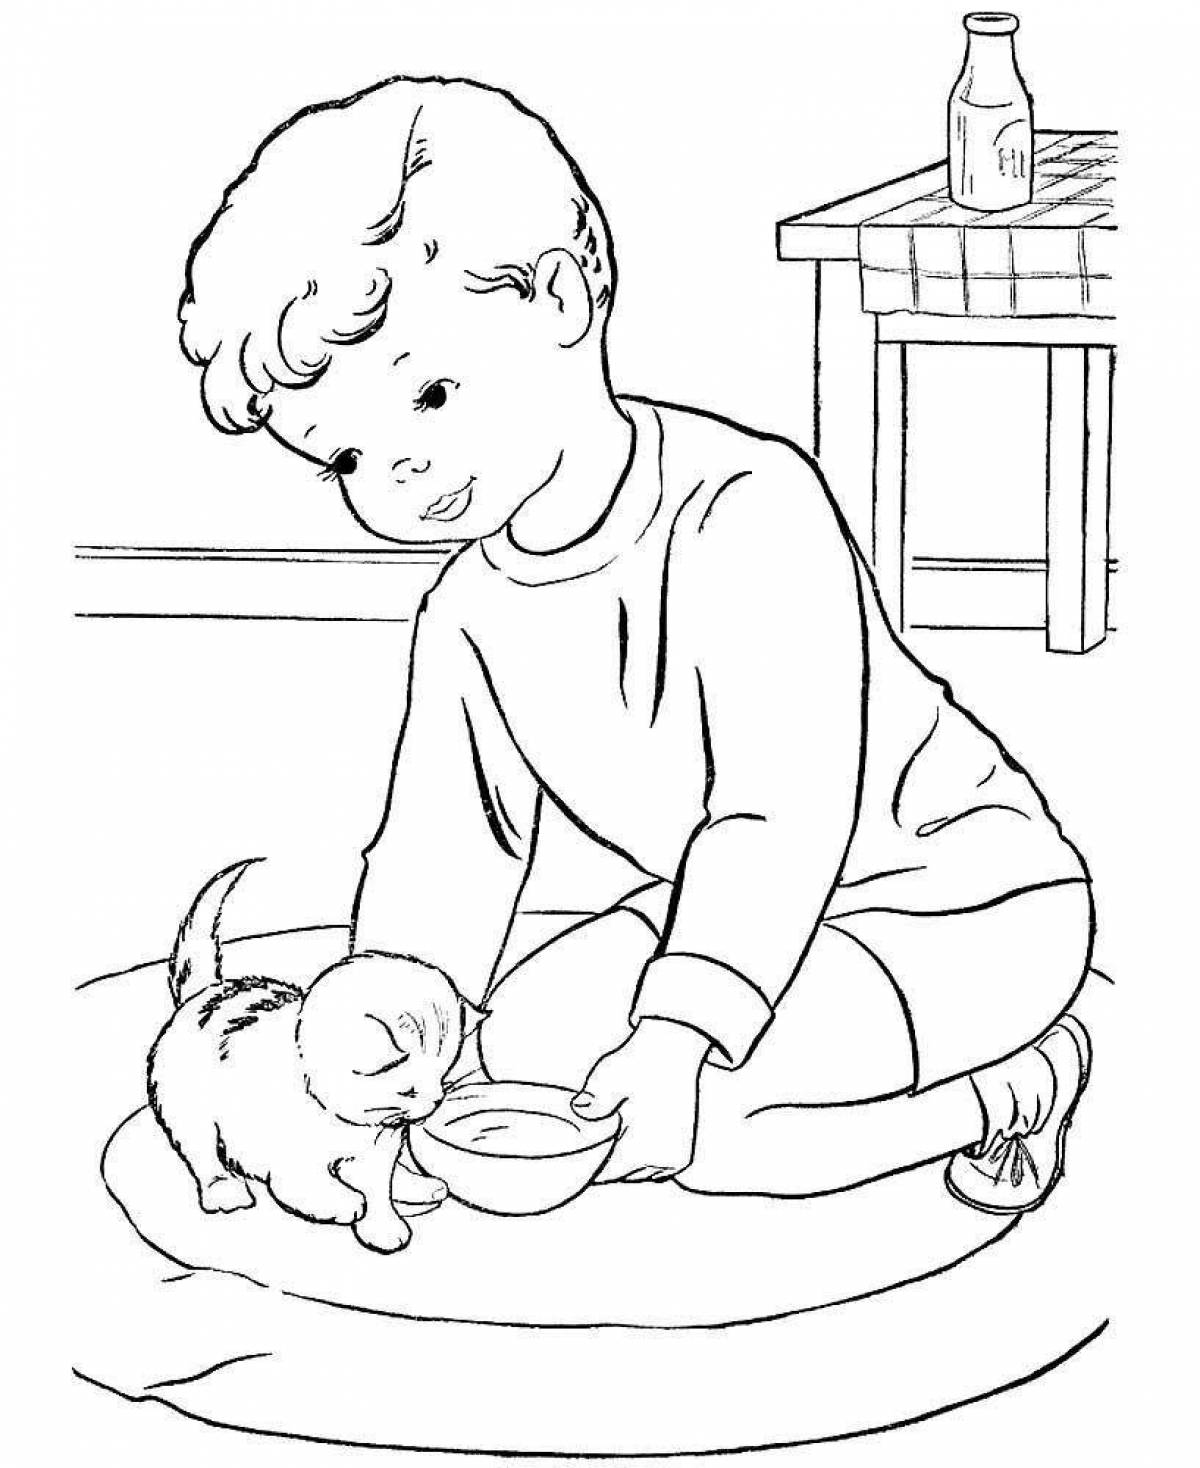 Coloring book for children